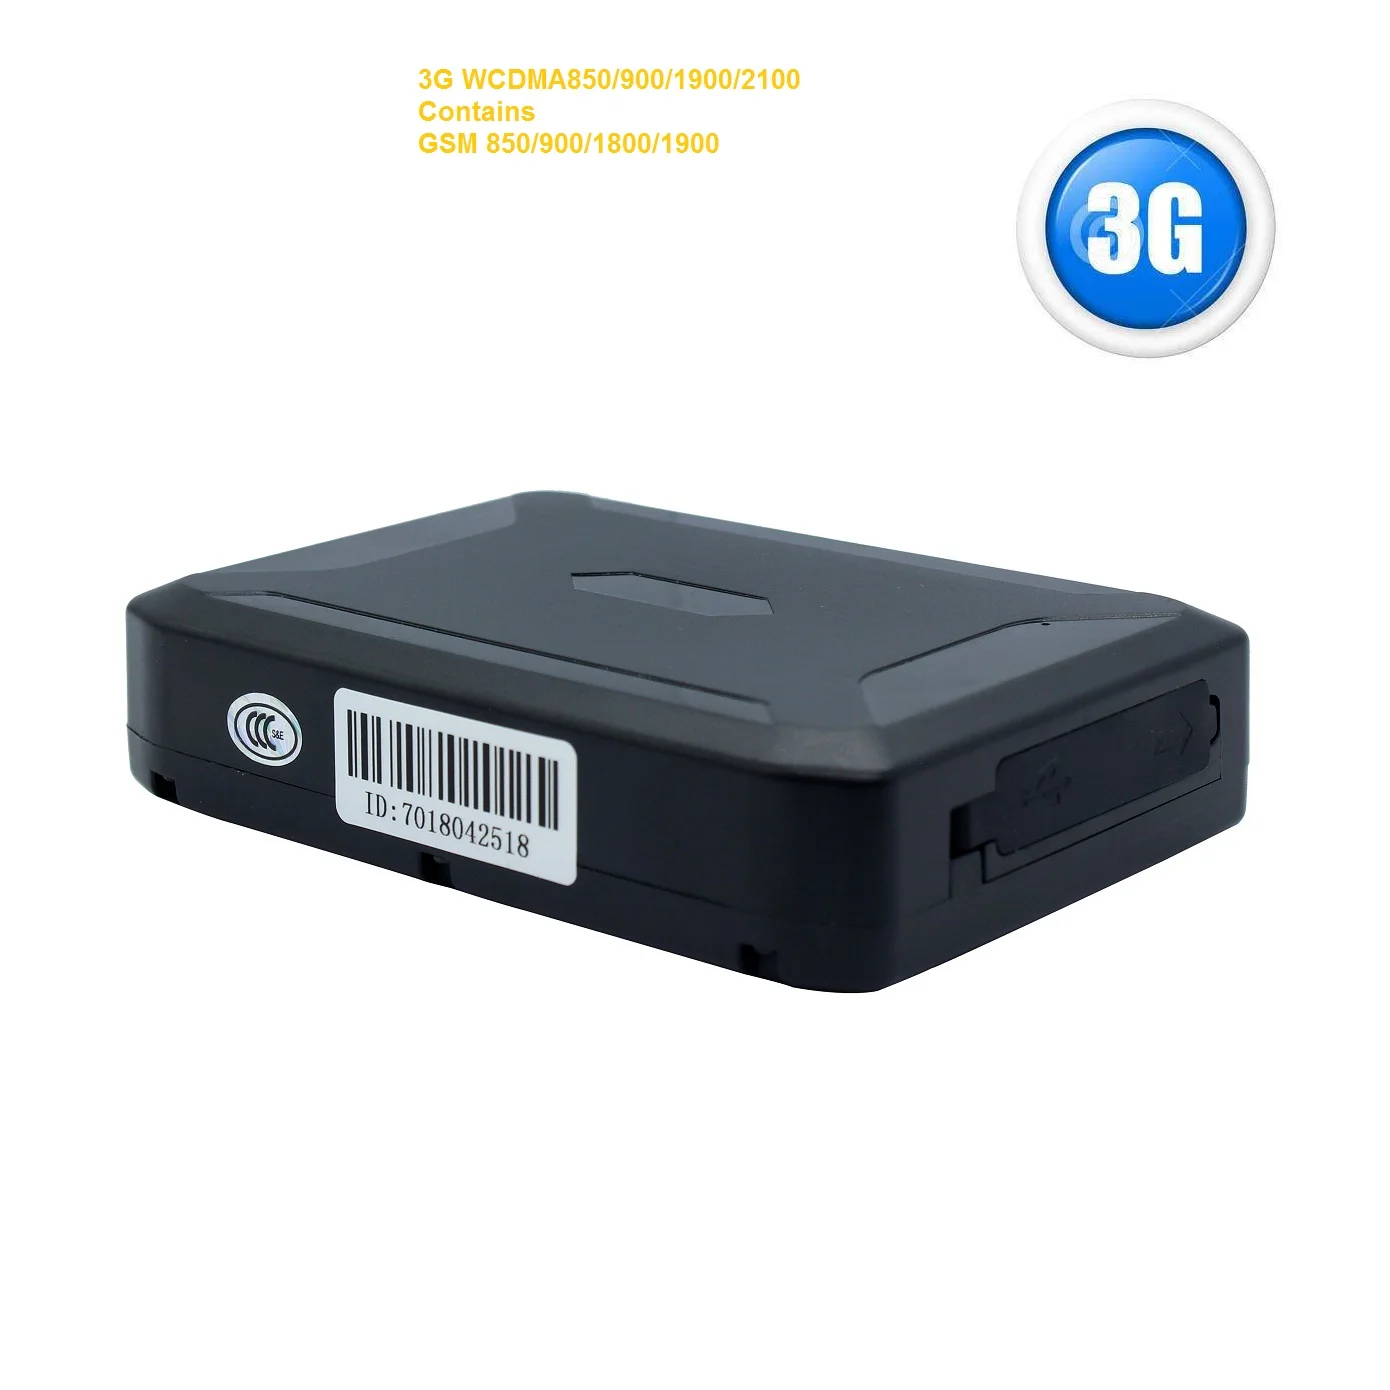 Asset Includes SIM Card with Data Plan for Tracking Car Canada Real Time 10000mAh Long Battery GPS Tracker 3G Vehicle